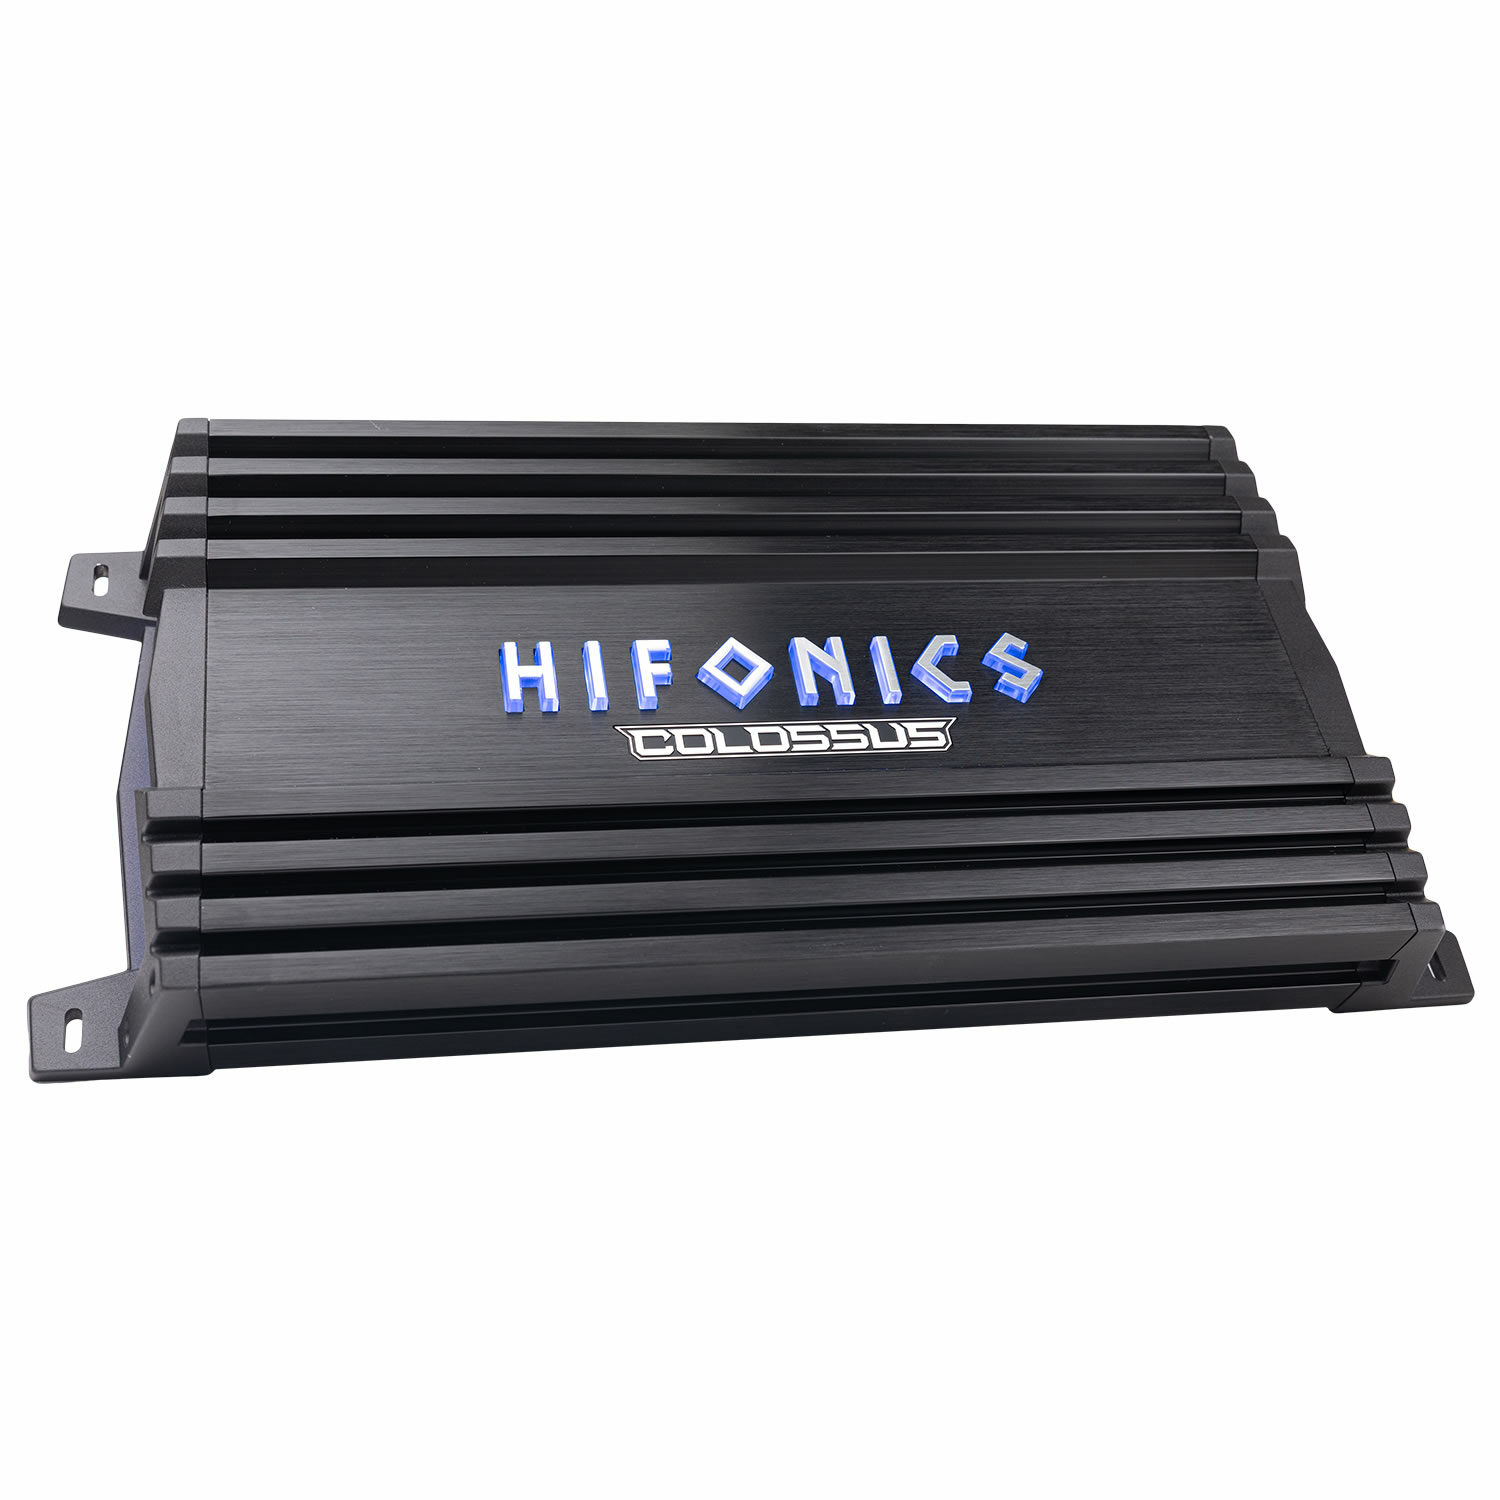 Hifonics, Power from the Gods.